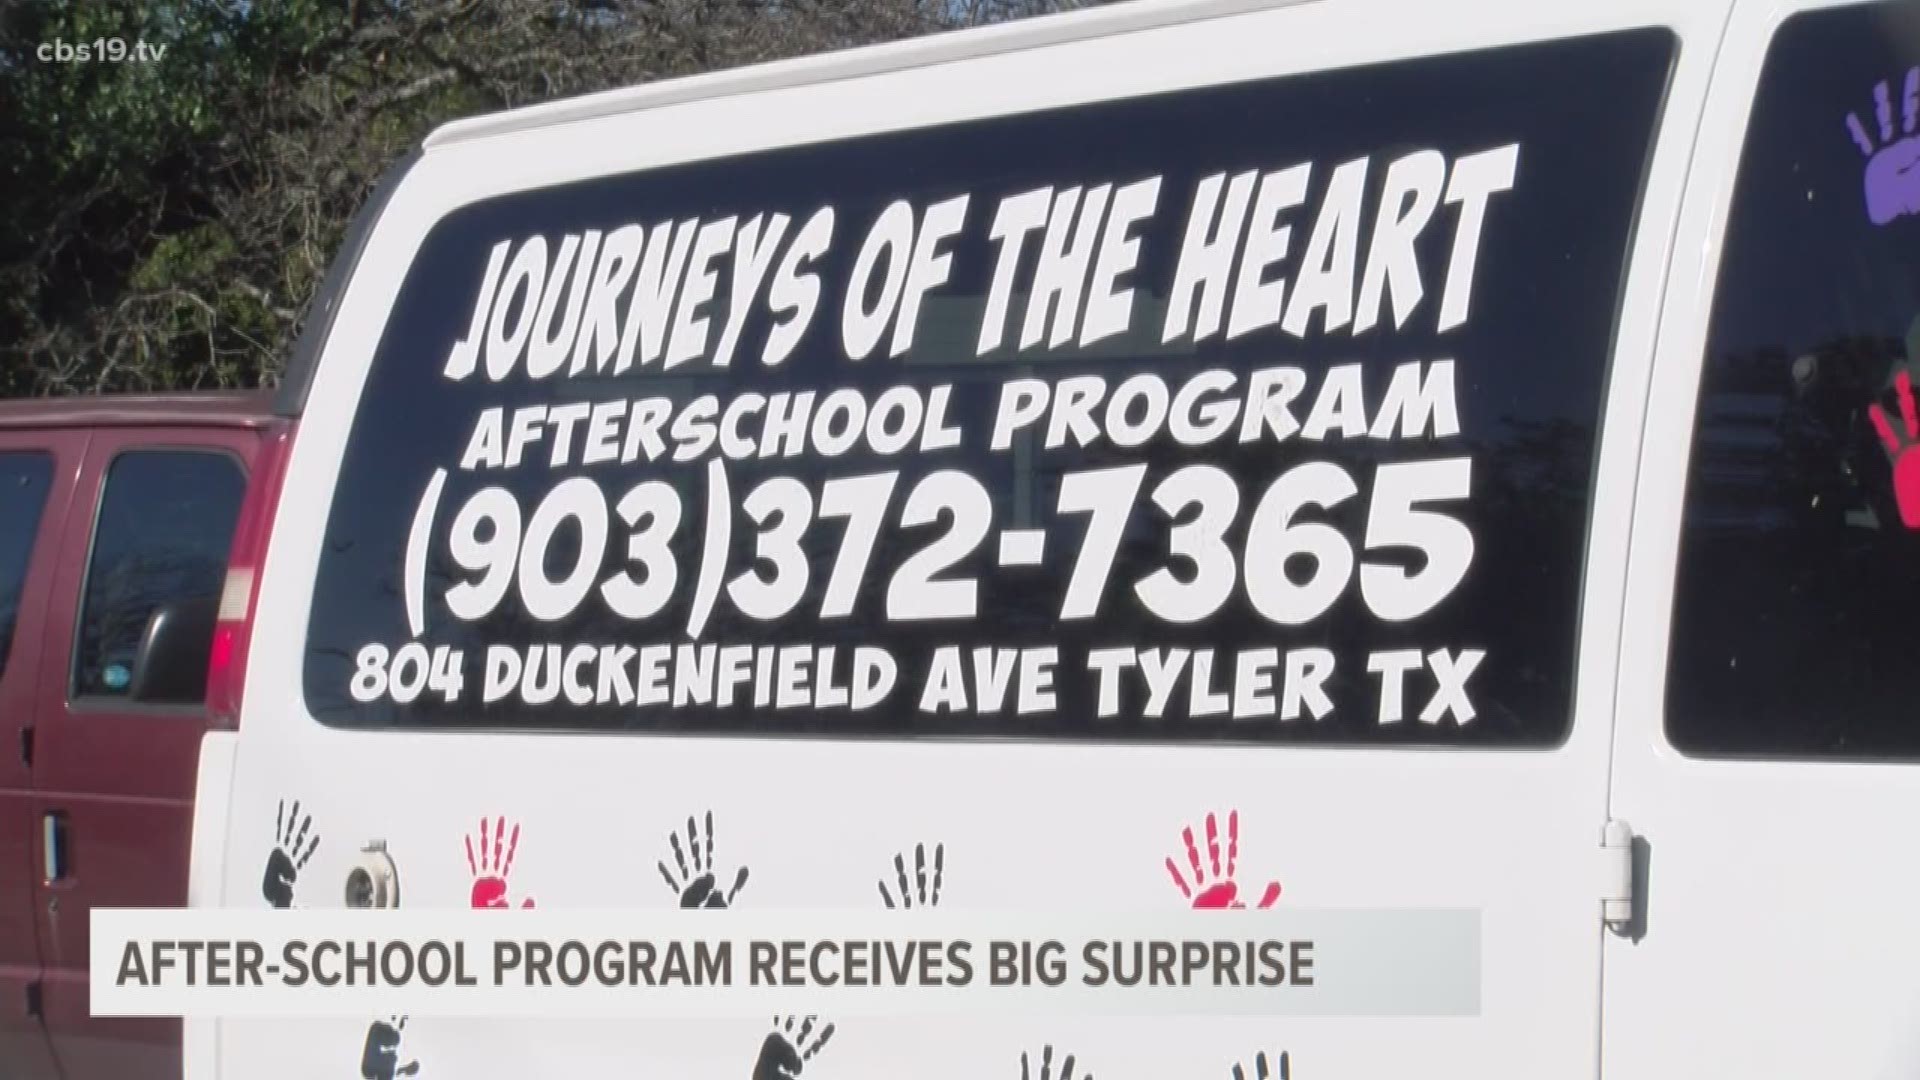 Journeys of the Heart received a $5000 donation today, courtesy of the TEGNA Foundation. The organization serves more than 100 local children after school each day.